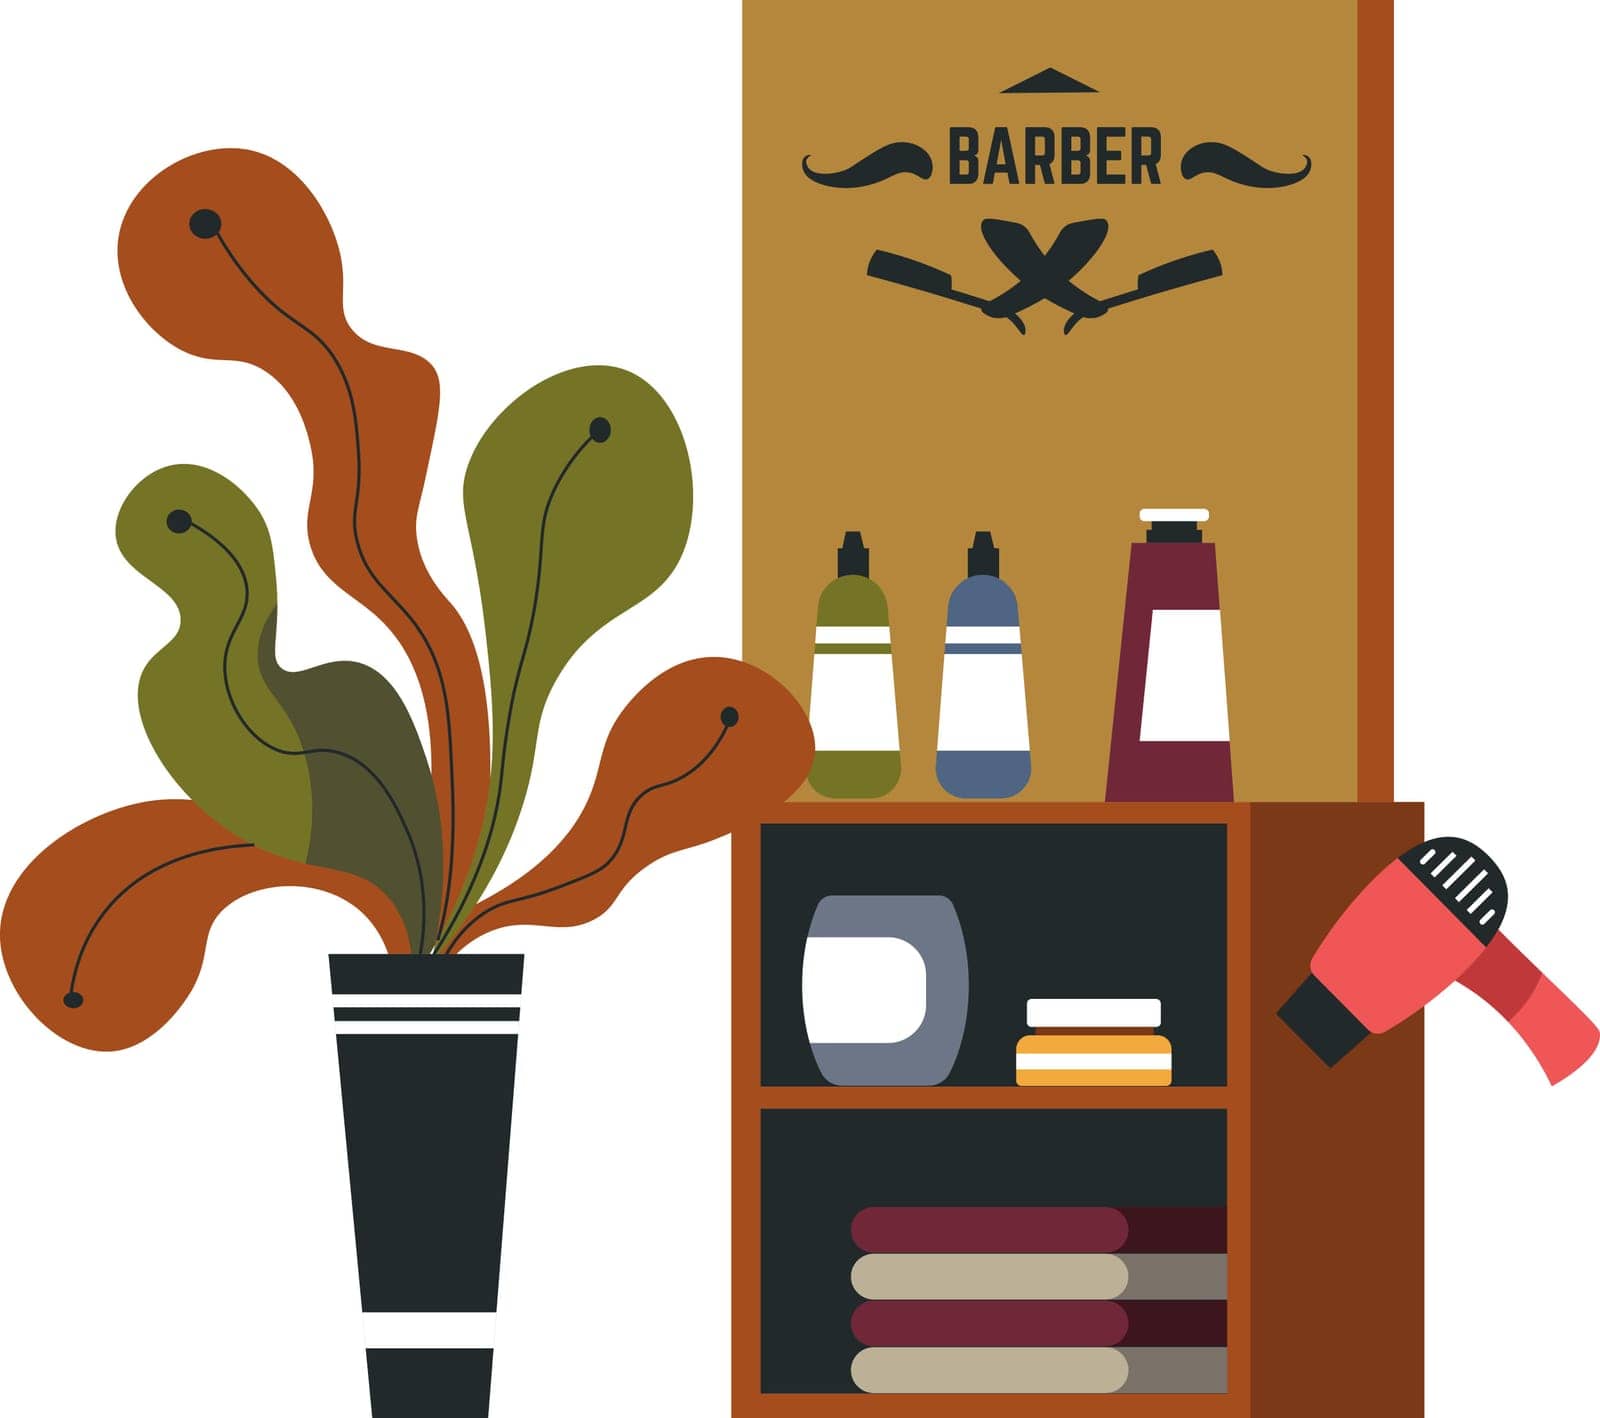 Barbershop interior design, isolated table or drawers with hair dryer and lotions, cosmetics and products. Houseplant decor for space revival, rustic label or sign on wood. Vector in flat style